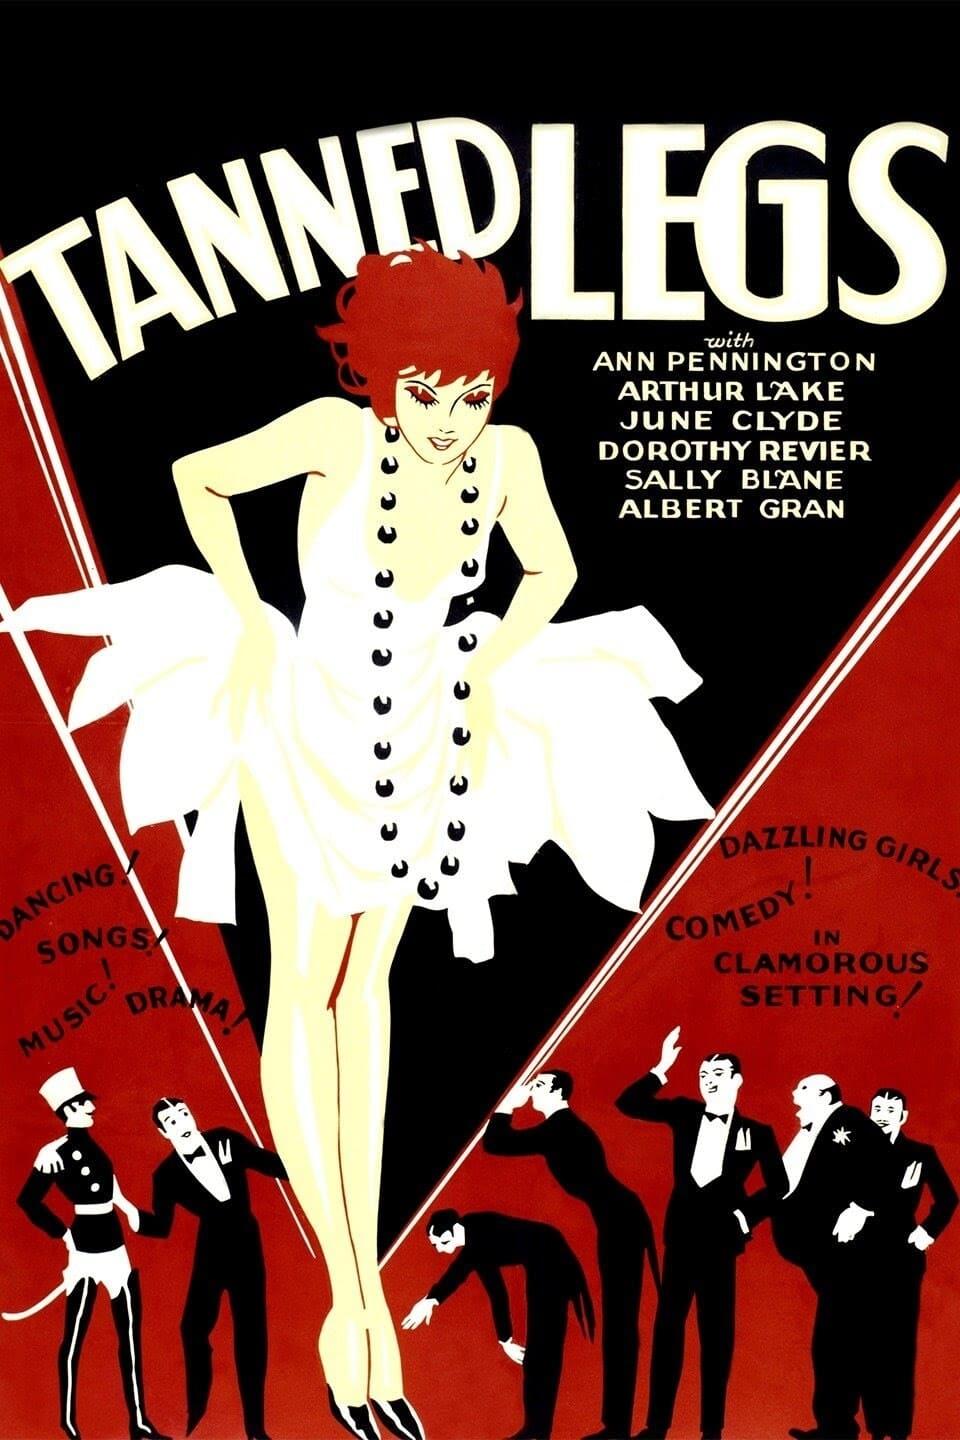 Tanned Legs poster